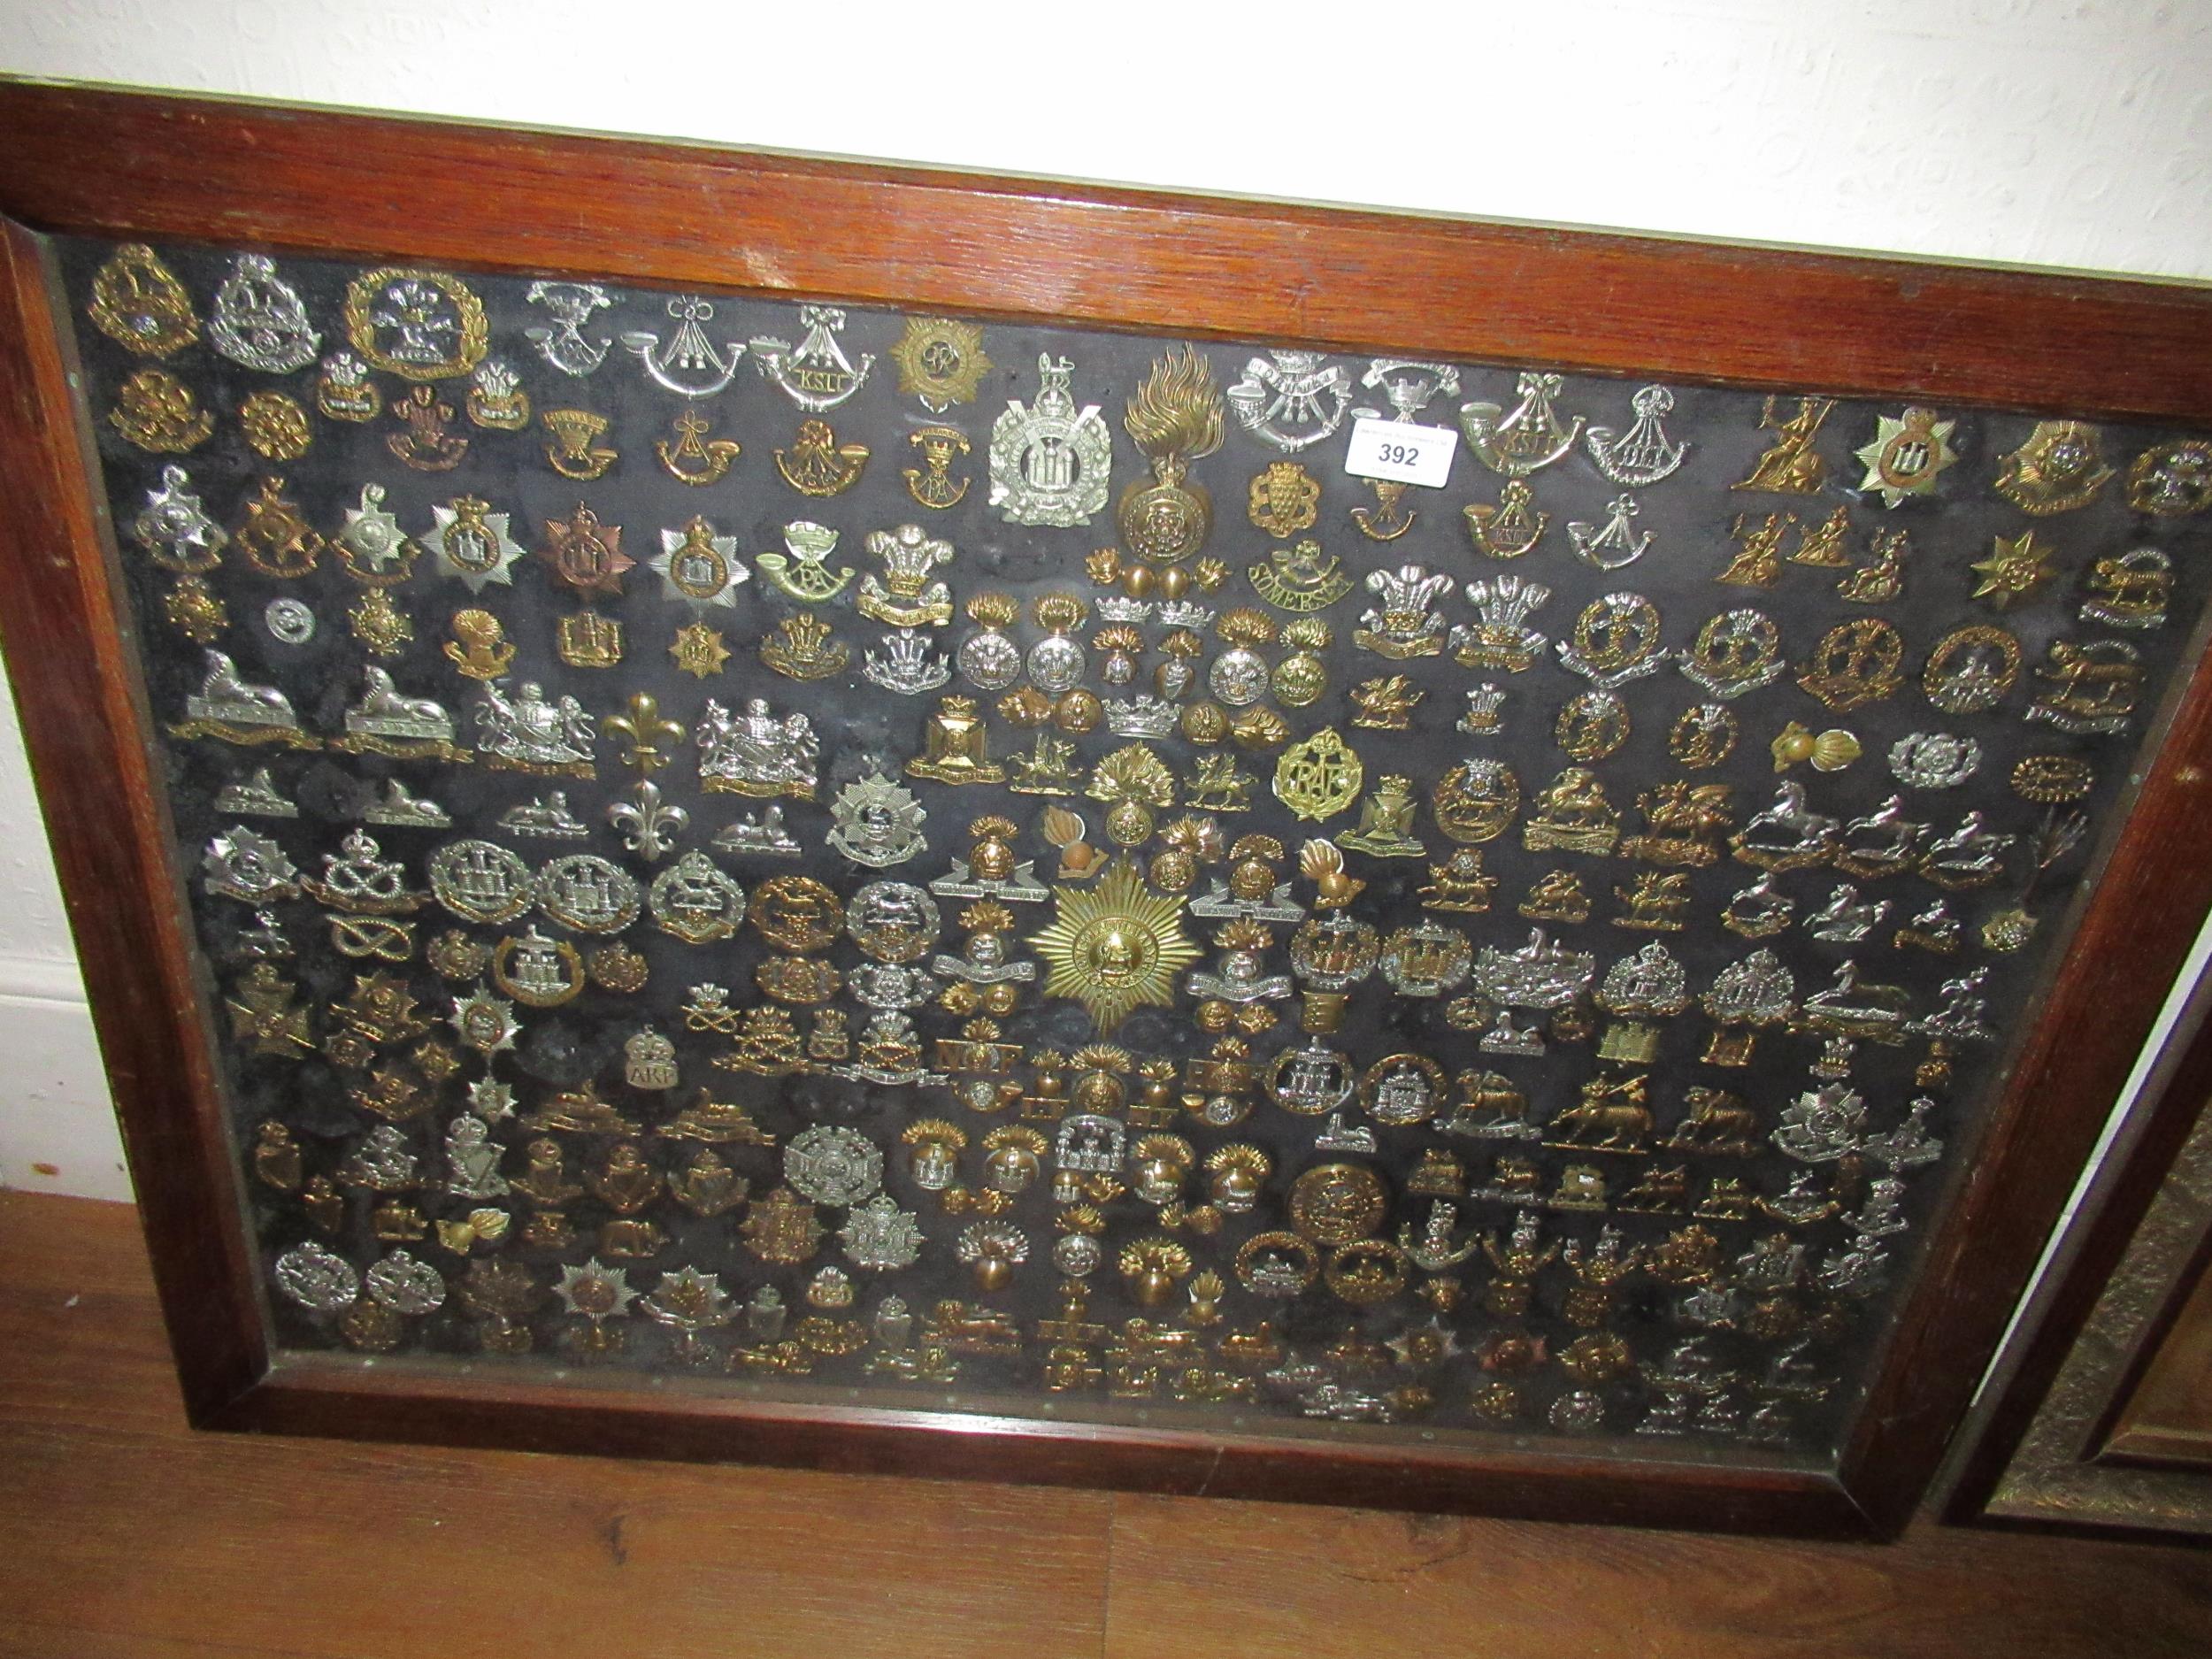 Large oak framed and glazed collection of mounted British Army cap badges, collars etc. from